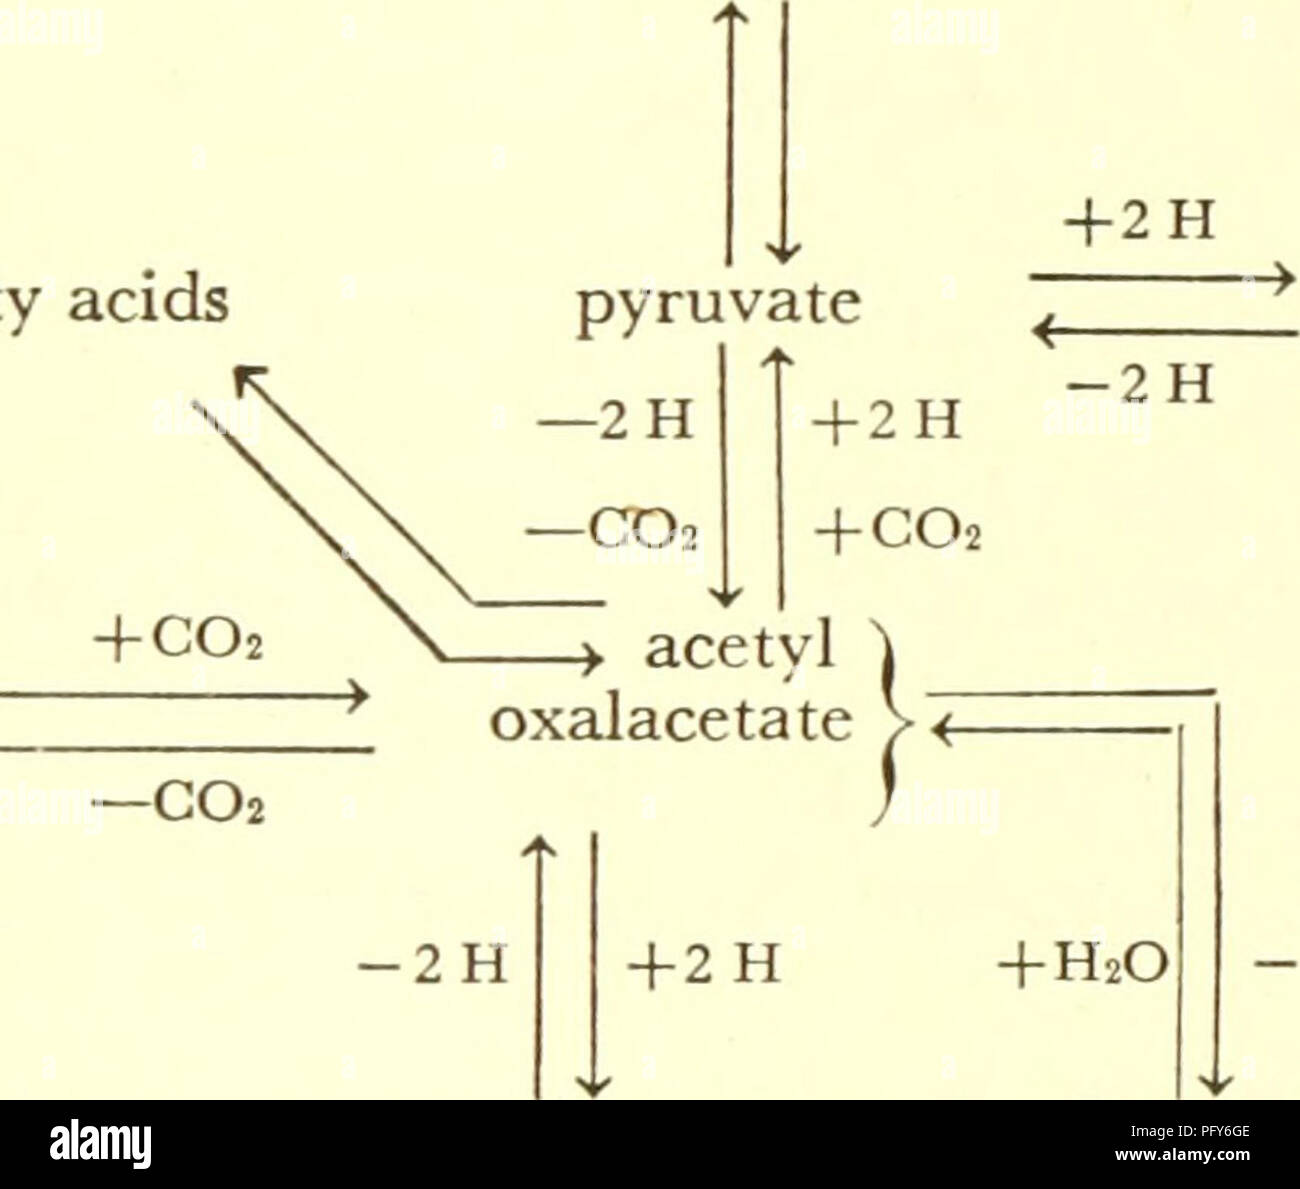 . Currents in biochemical research. Biochemistry -- Research; Biochemistry; Research. CARBON DIOXIDE formed earlier can be converted to pyruvic acid by reductive carboxyl- ation, i. e., by reversal of reaction Ilia. We would thus have a cyclic mechanism whereby carbon dioxide and hydrogen entering at various points would emerge as pyruvic acid. The di- and tricarboxylic acids would only act catalytically as carriers of carbon dioxide and hydrogen. This is a reversal of the so-called tricarboxylic acid cycle, which is considered to be an important pathway for the oxidative breakdown of carbohyd Stock Photo